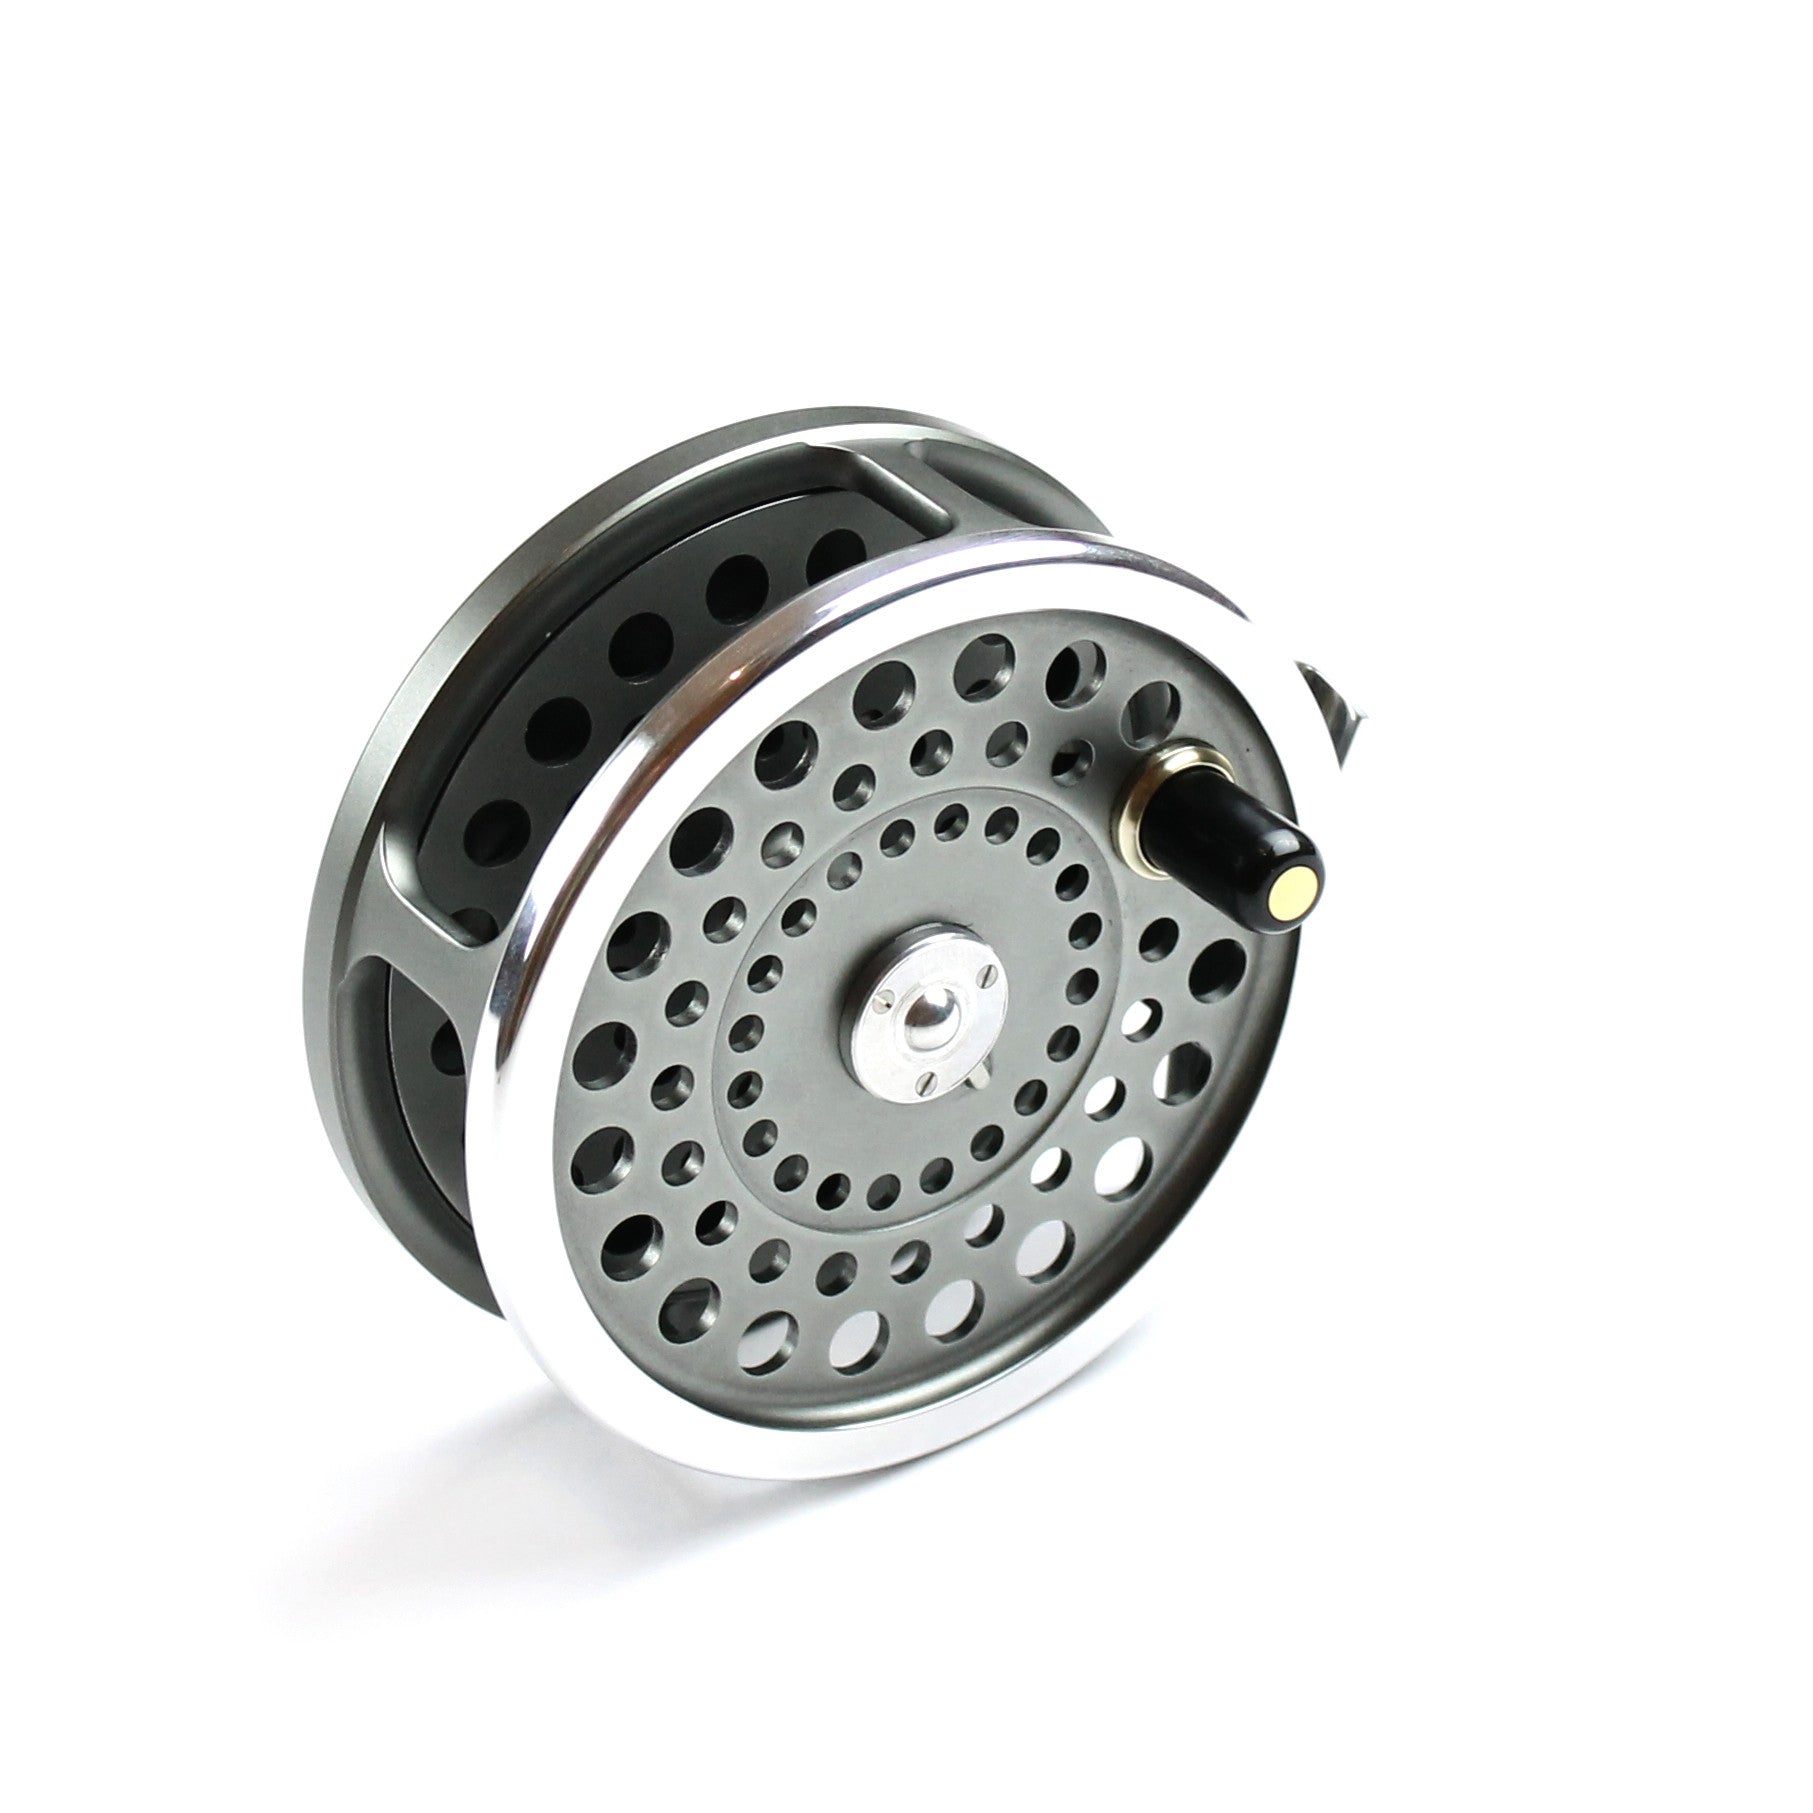 Hardy Marquis LWT 5 Fly Reel